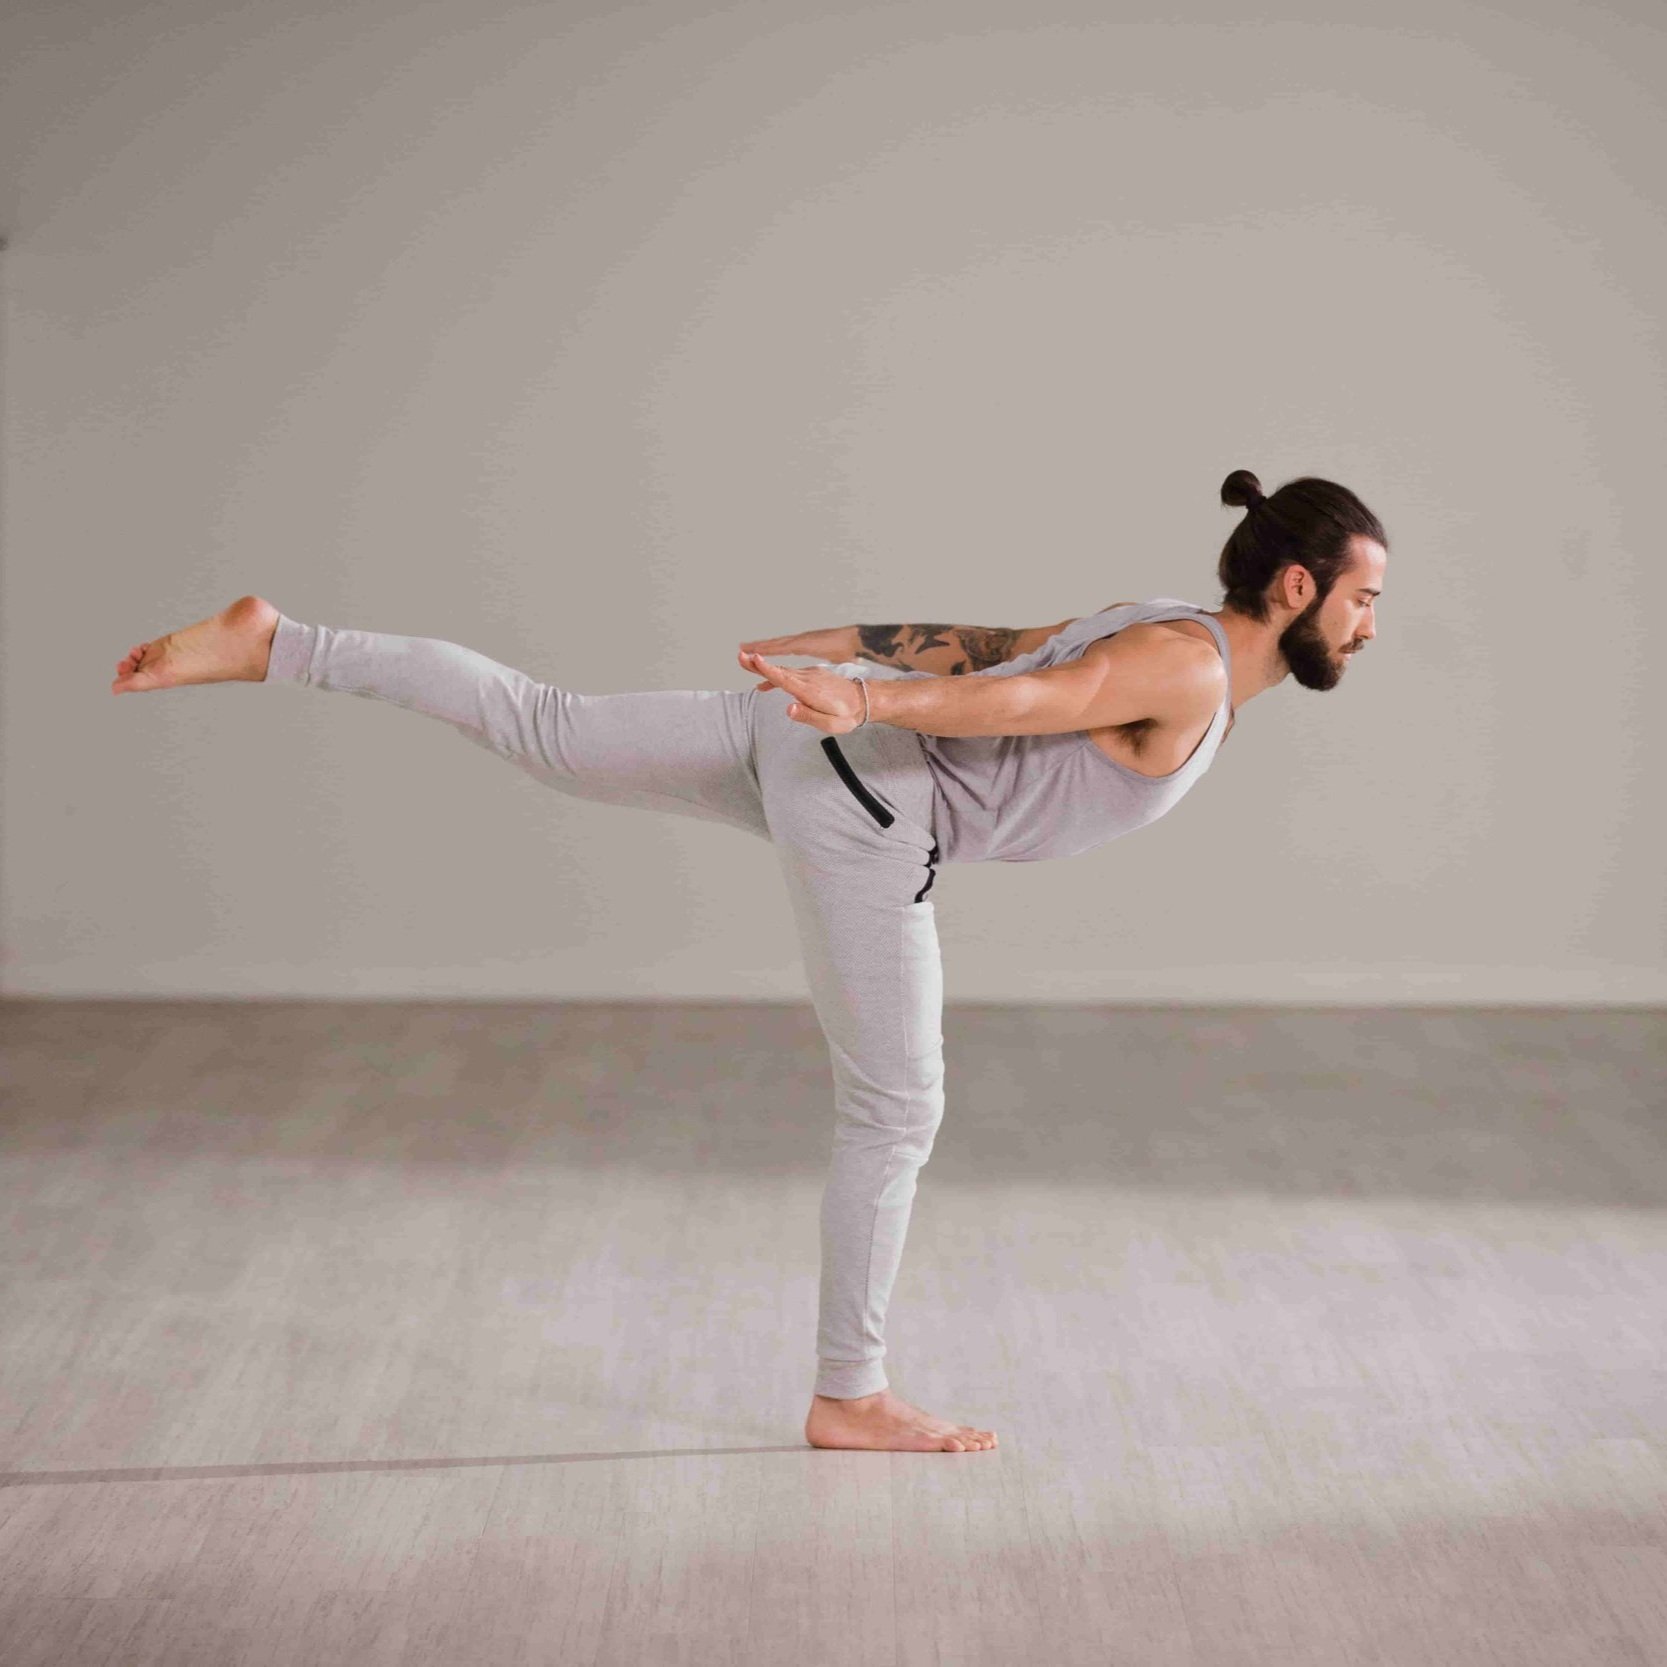 Scorpion Pose How To - Tips For Hardest Yoga Move